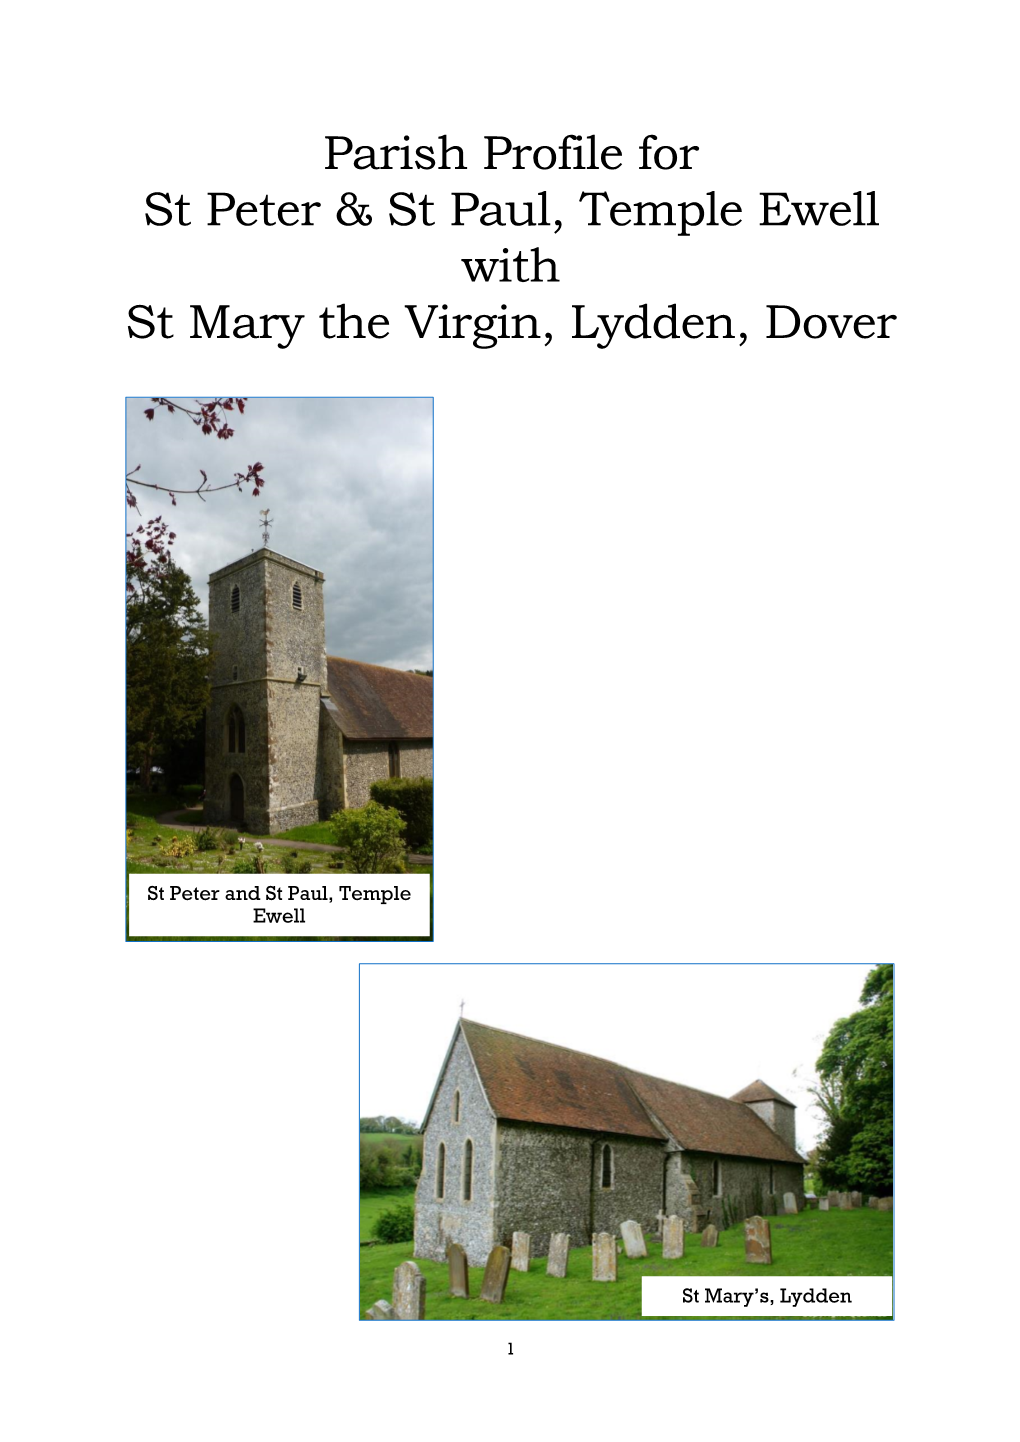 Parish Profile for St Peter & St Paul, Temple Ewell with St Mary The